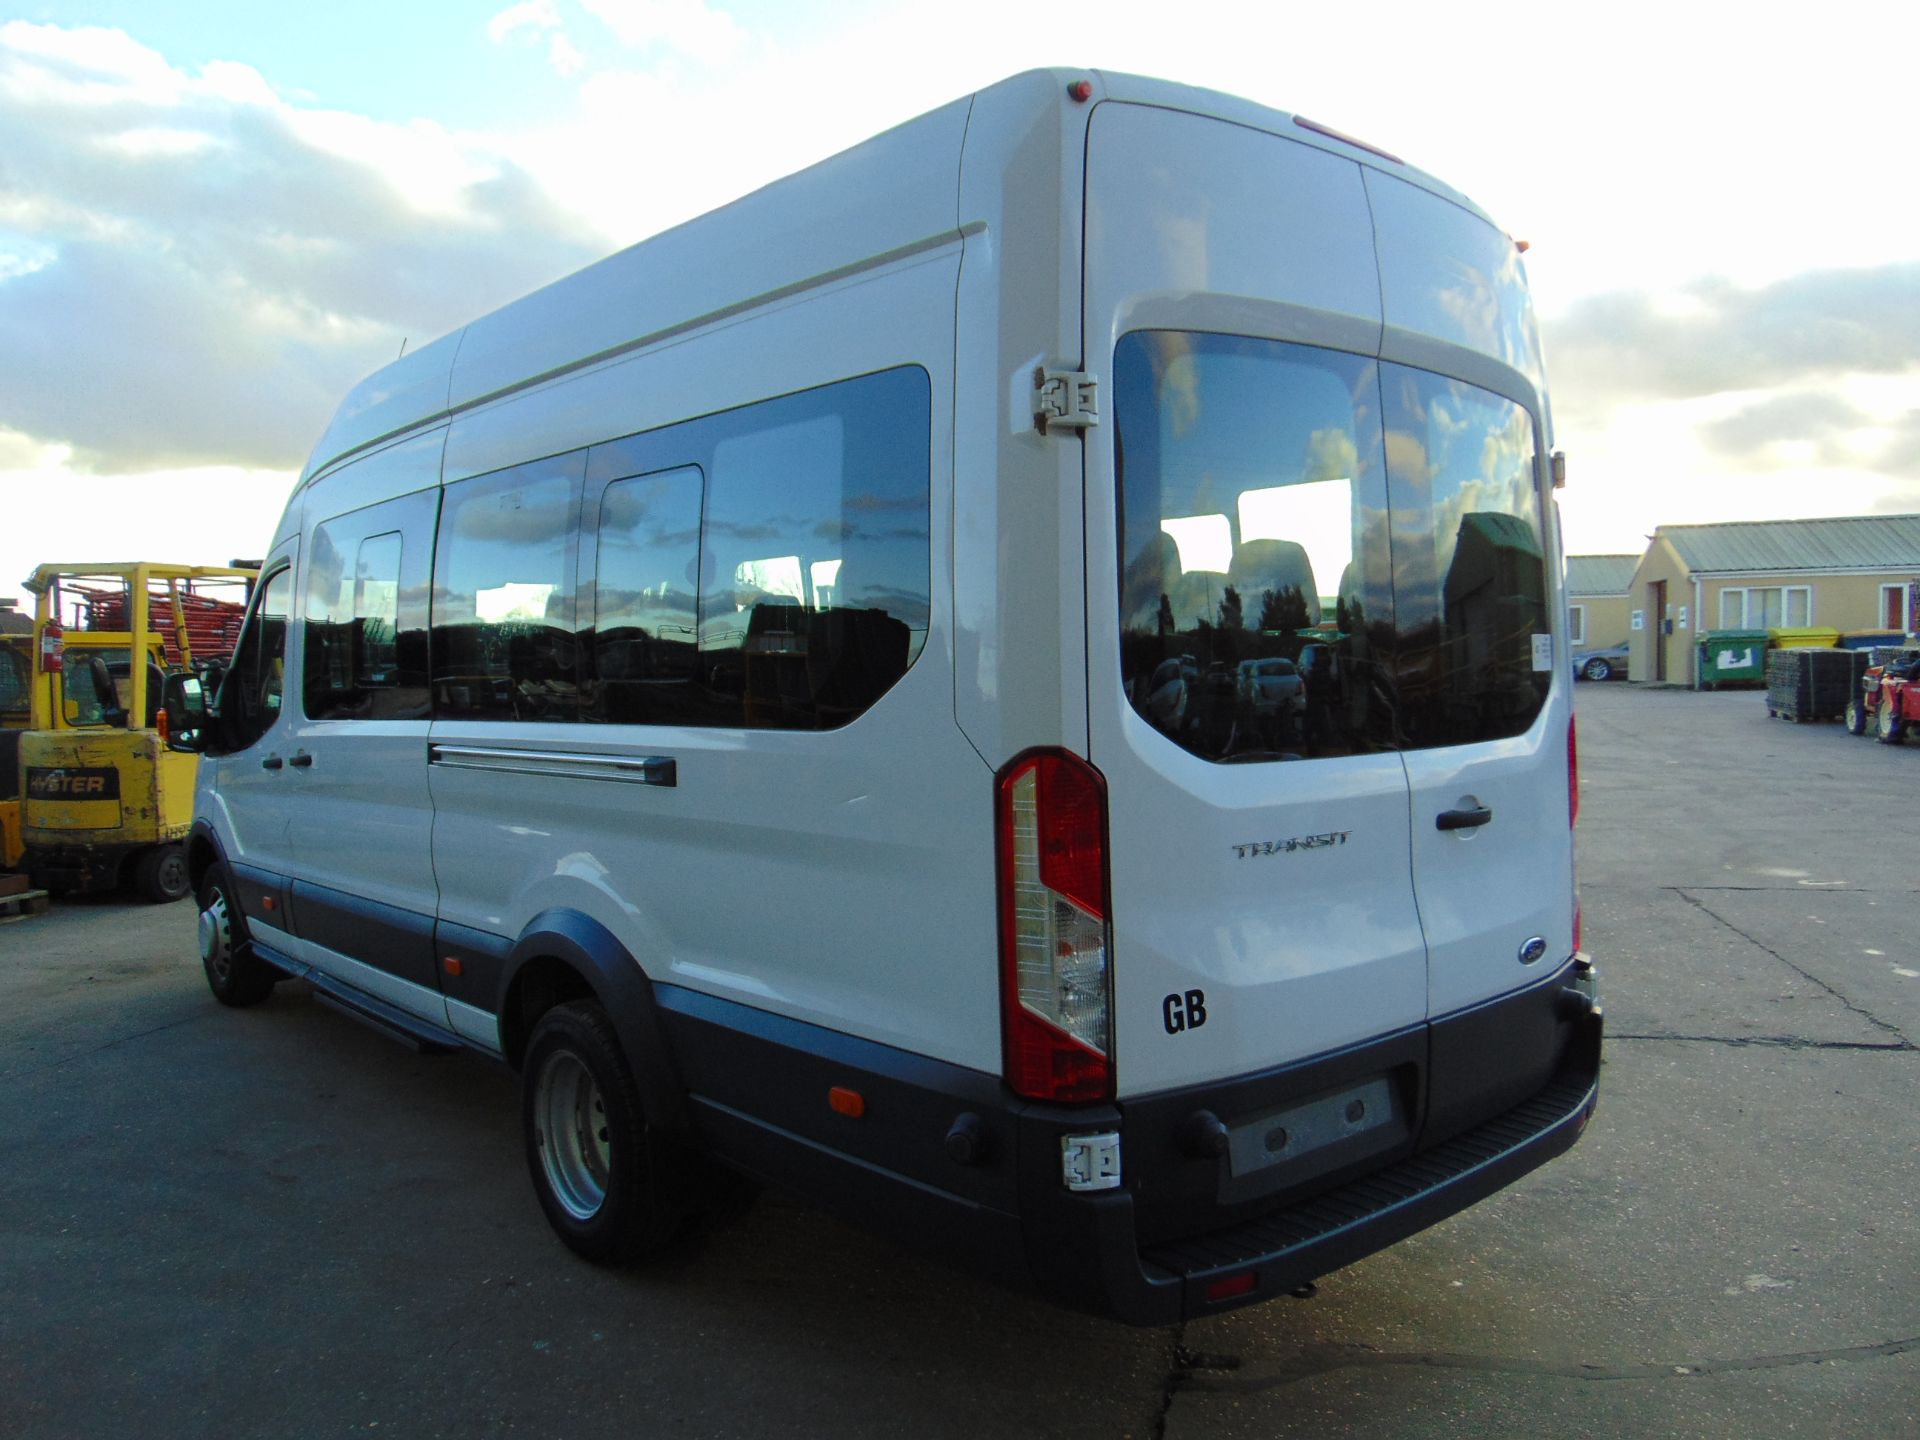 2014 Ford Transit 2.2 TDCI 460 17 Seat Minibus Only 72,000 kms ( 44,000 miles ) - Image 8 of 31